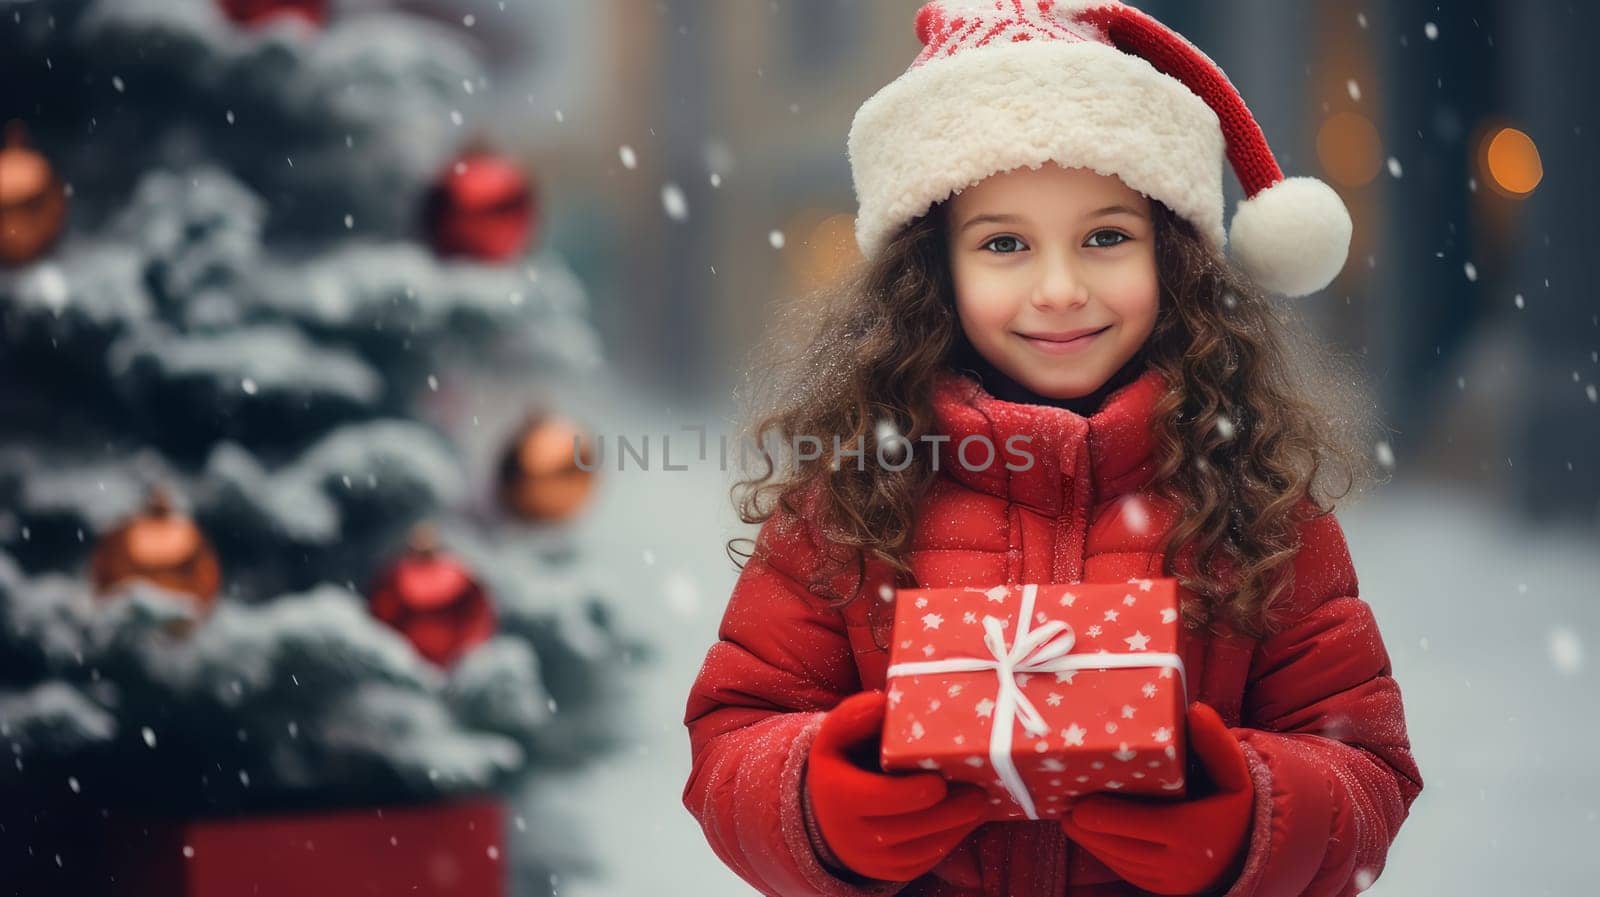 Pretty smiling girl, child in red jacket and hat holding Christmas gifts while standing against background of decorated Christmas tree outdoors on snowy day of winter holidays.